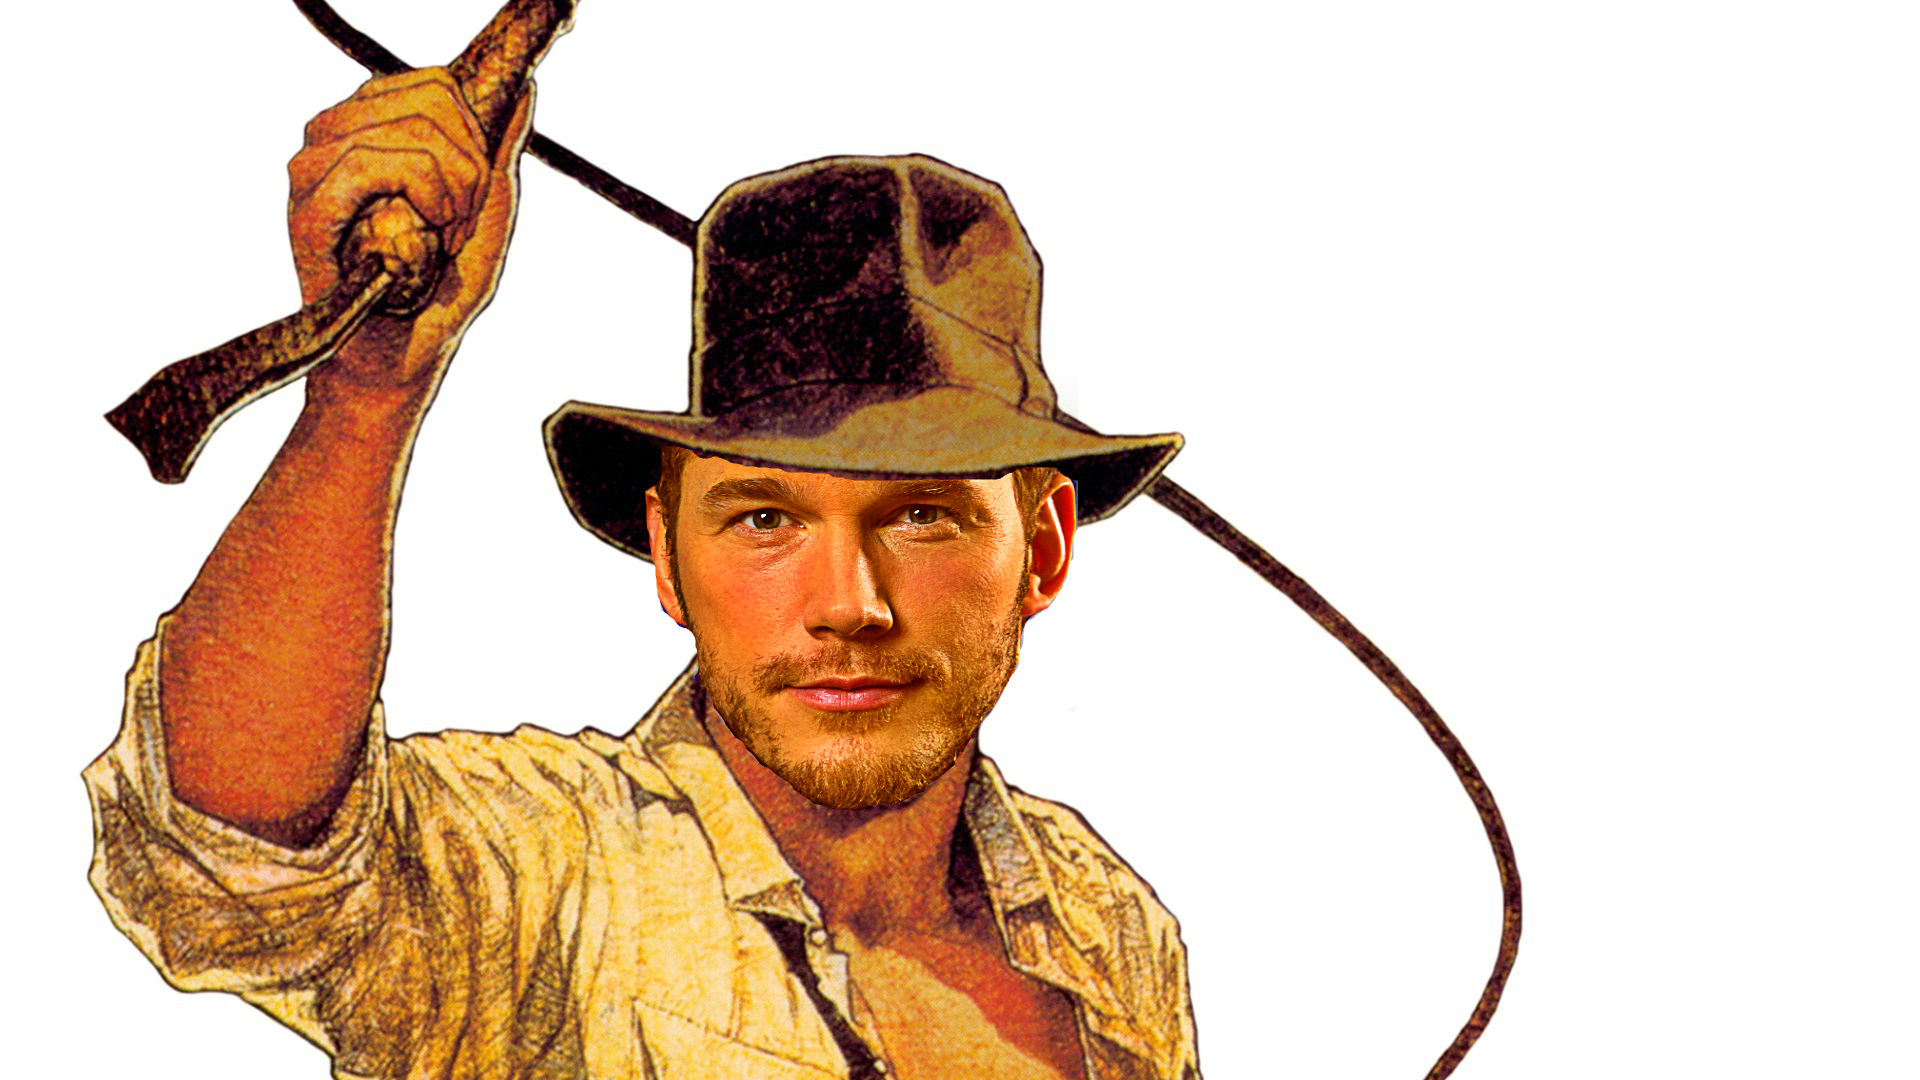 HD desktop wallpaper featuring a person in a hat holding a whip, evocative of adventure, tagged with Chris Pratt.